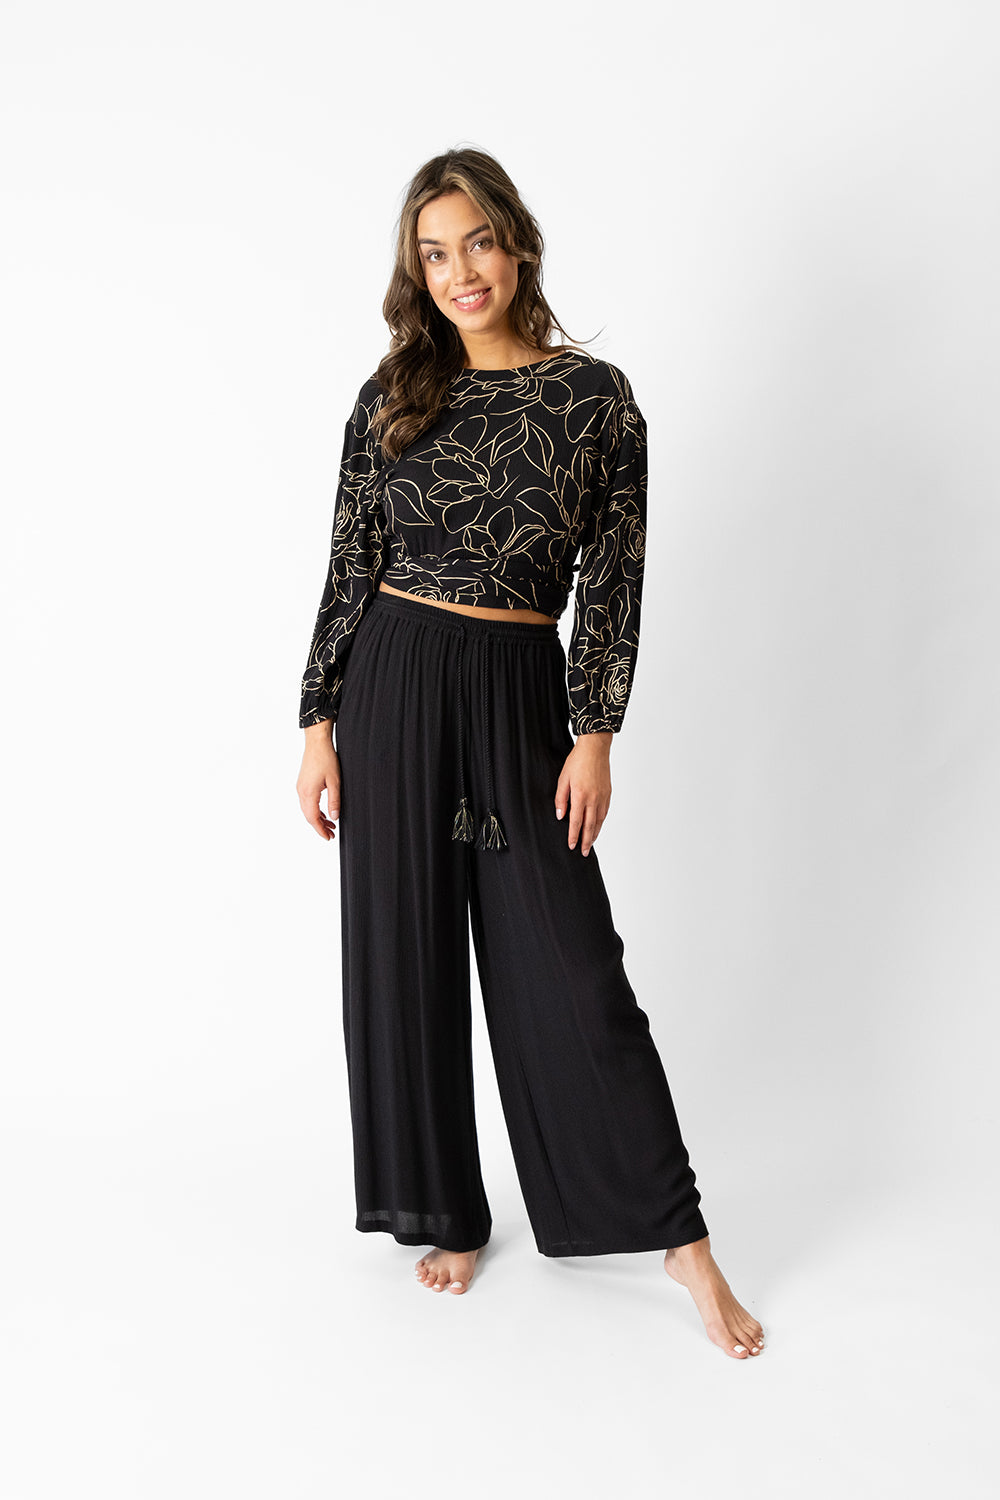 koy resort miami shine golden flower print long sleeve wrap top for spring 2024 women's fashion collection worn with miami wide leg pants